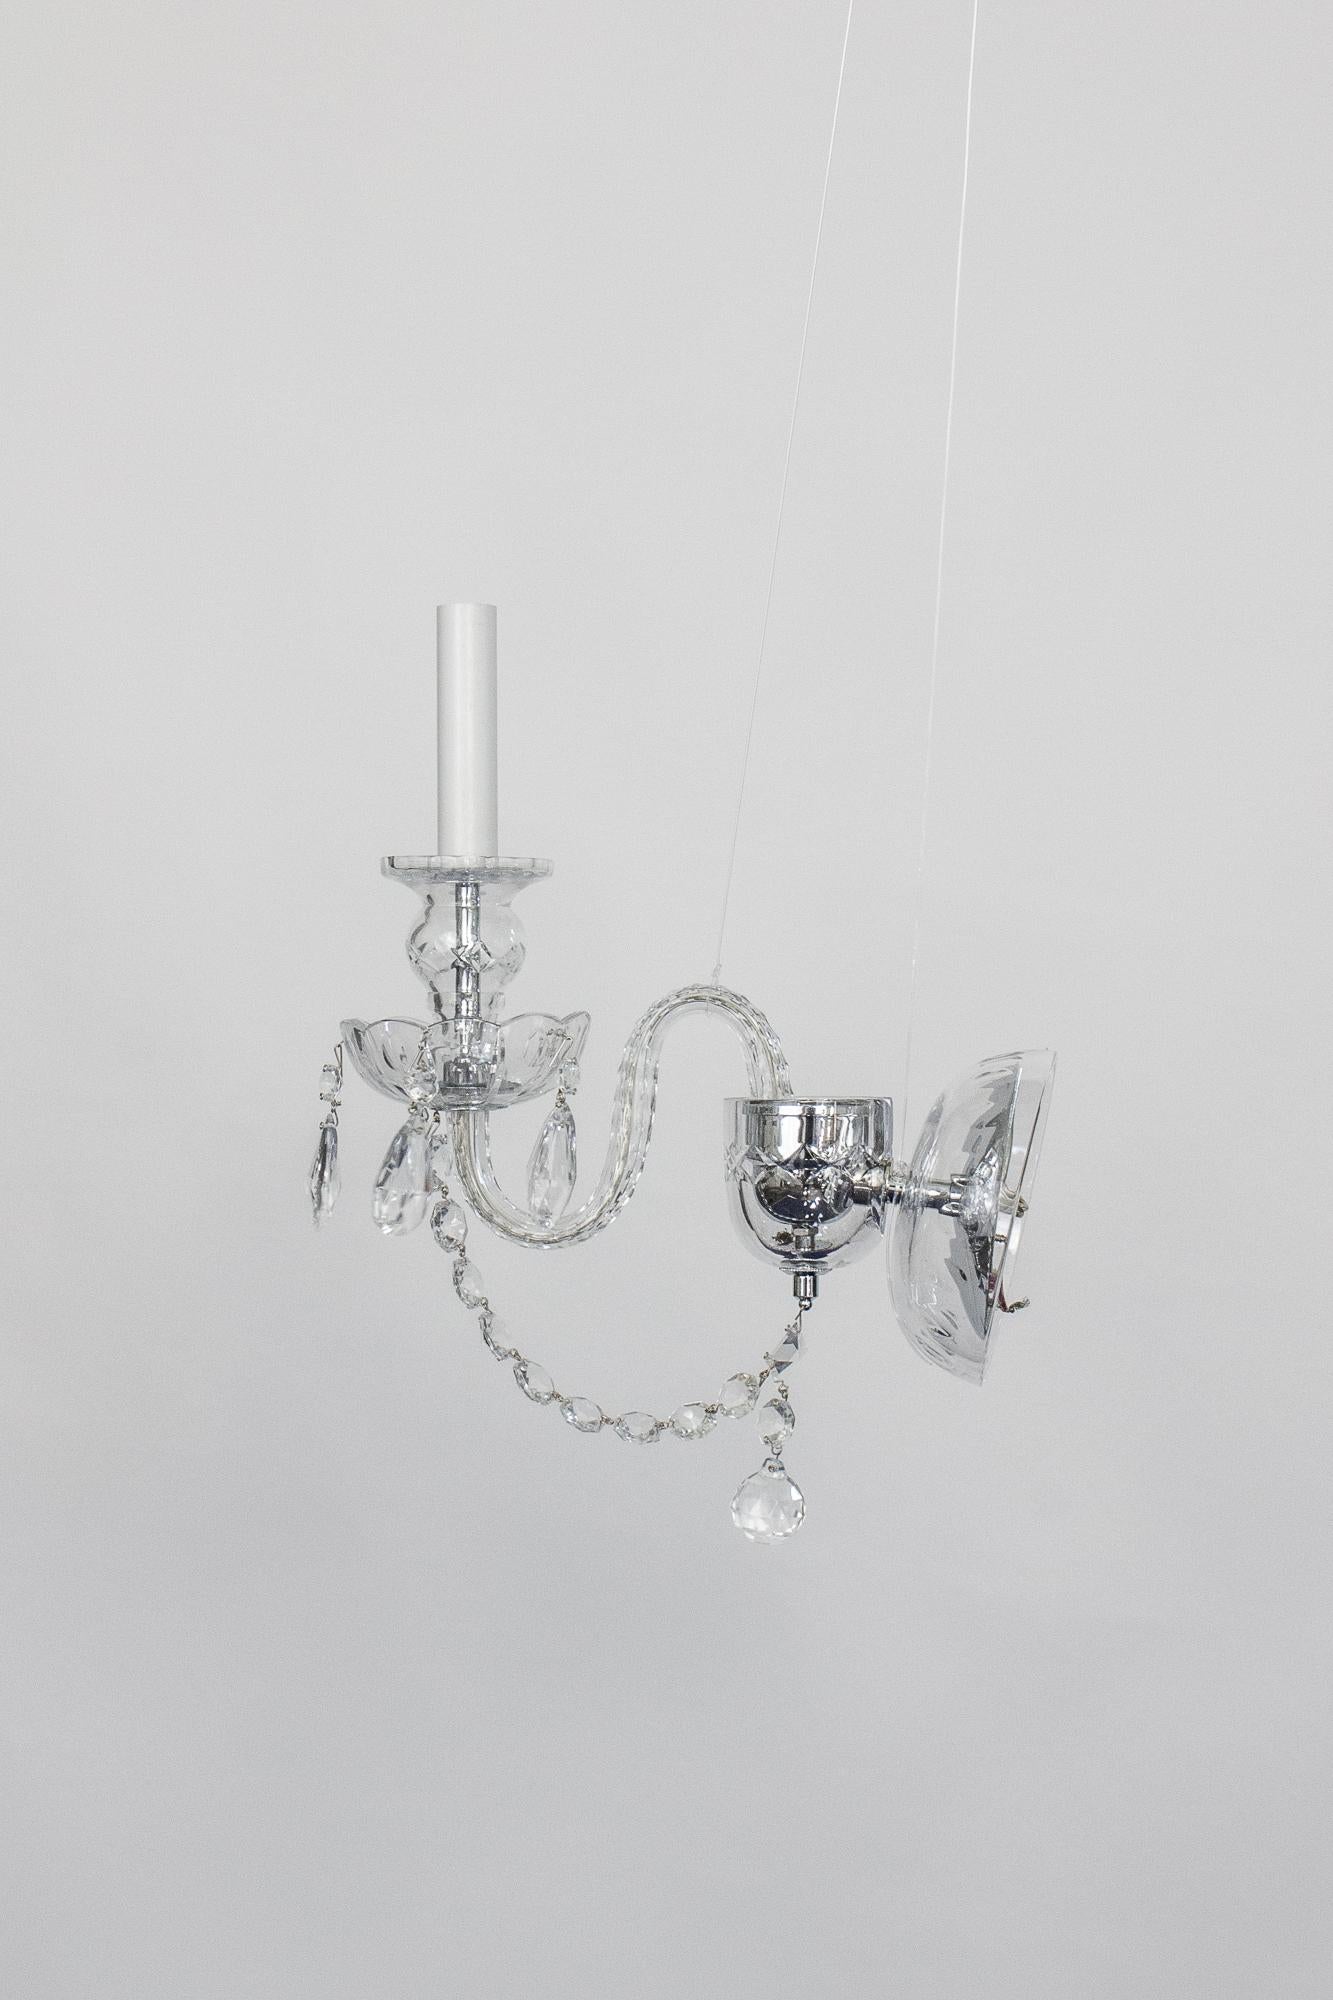 A pair of single arm crystal sconces, traditional crystal arms, bobeche, and backplate. Chrome plated metals. Made by Preciosa in the Czech Republic. New, showroom sample. Wired for use in the US, 40 watt max.